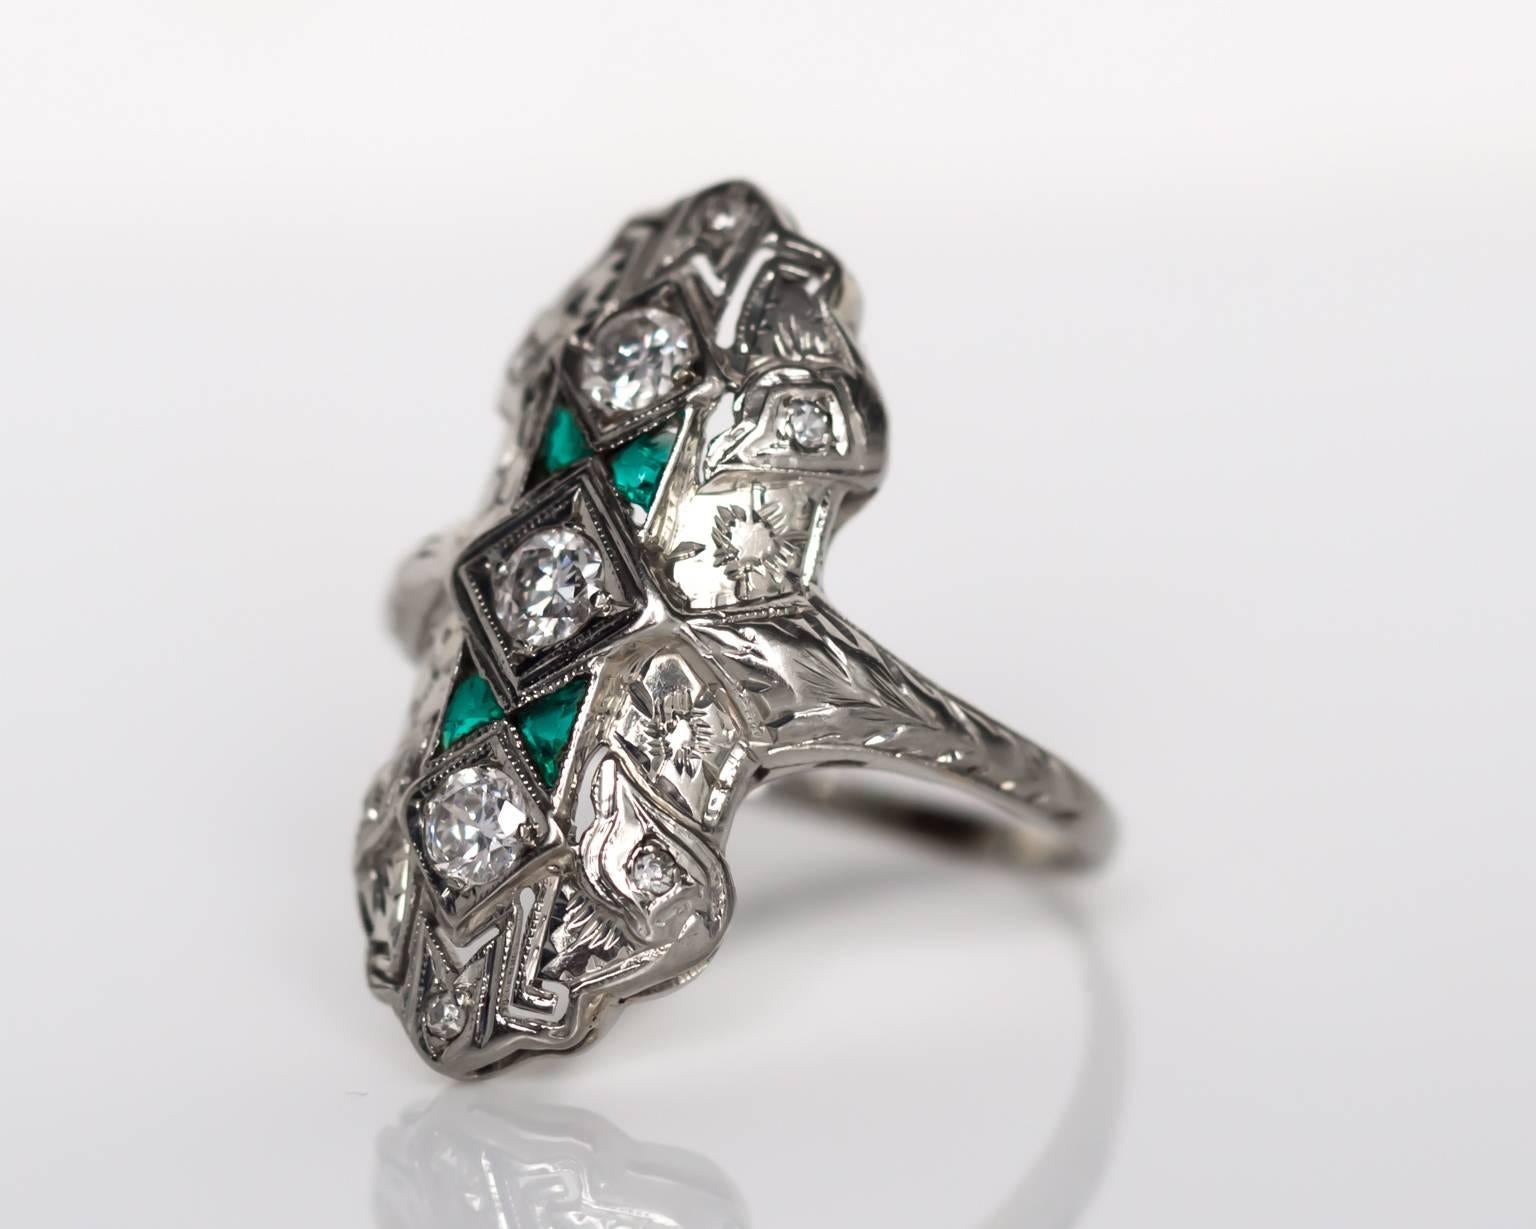 Item Details: 
Ring Size: 8.75
Metal Type: 20 Karat White Gold 
Weight: 4.9 grams

Diamond Details
Shape: Old European Cut
Carat Weight: .35 carat, total weight
Color: G-H
Clarity: SI

Color Stone Details: 
Type: Emerald
Shape: French Cut
Carat